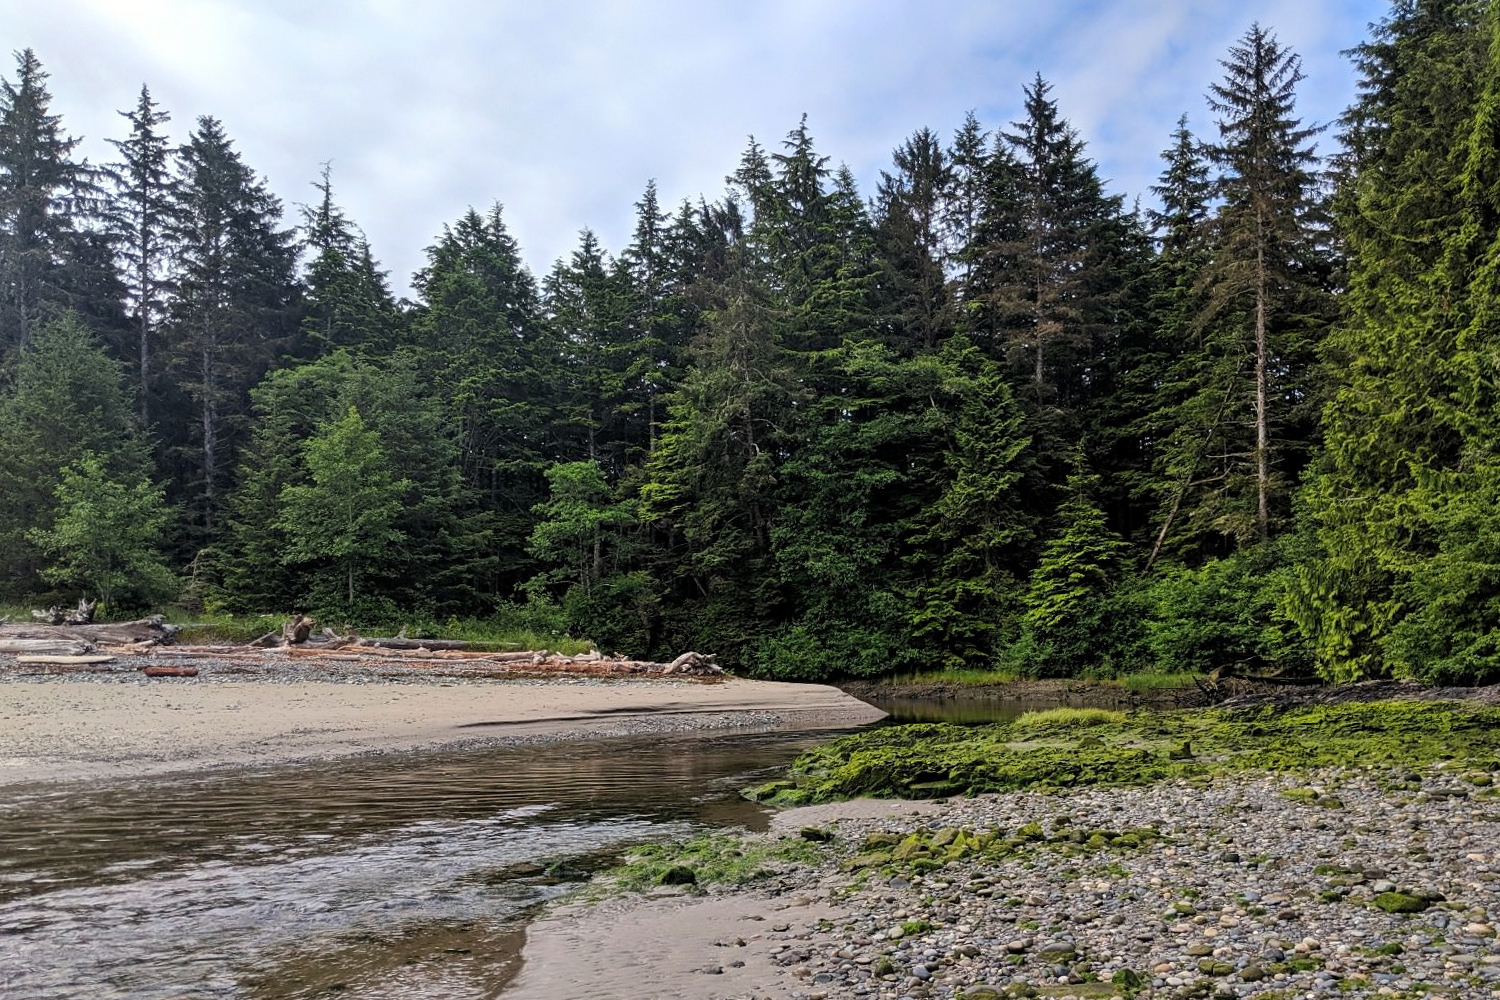 The ozette river is best crossed at negative tide. always assess river conditions before attempting to cross.